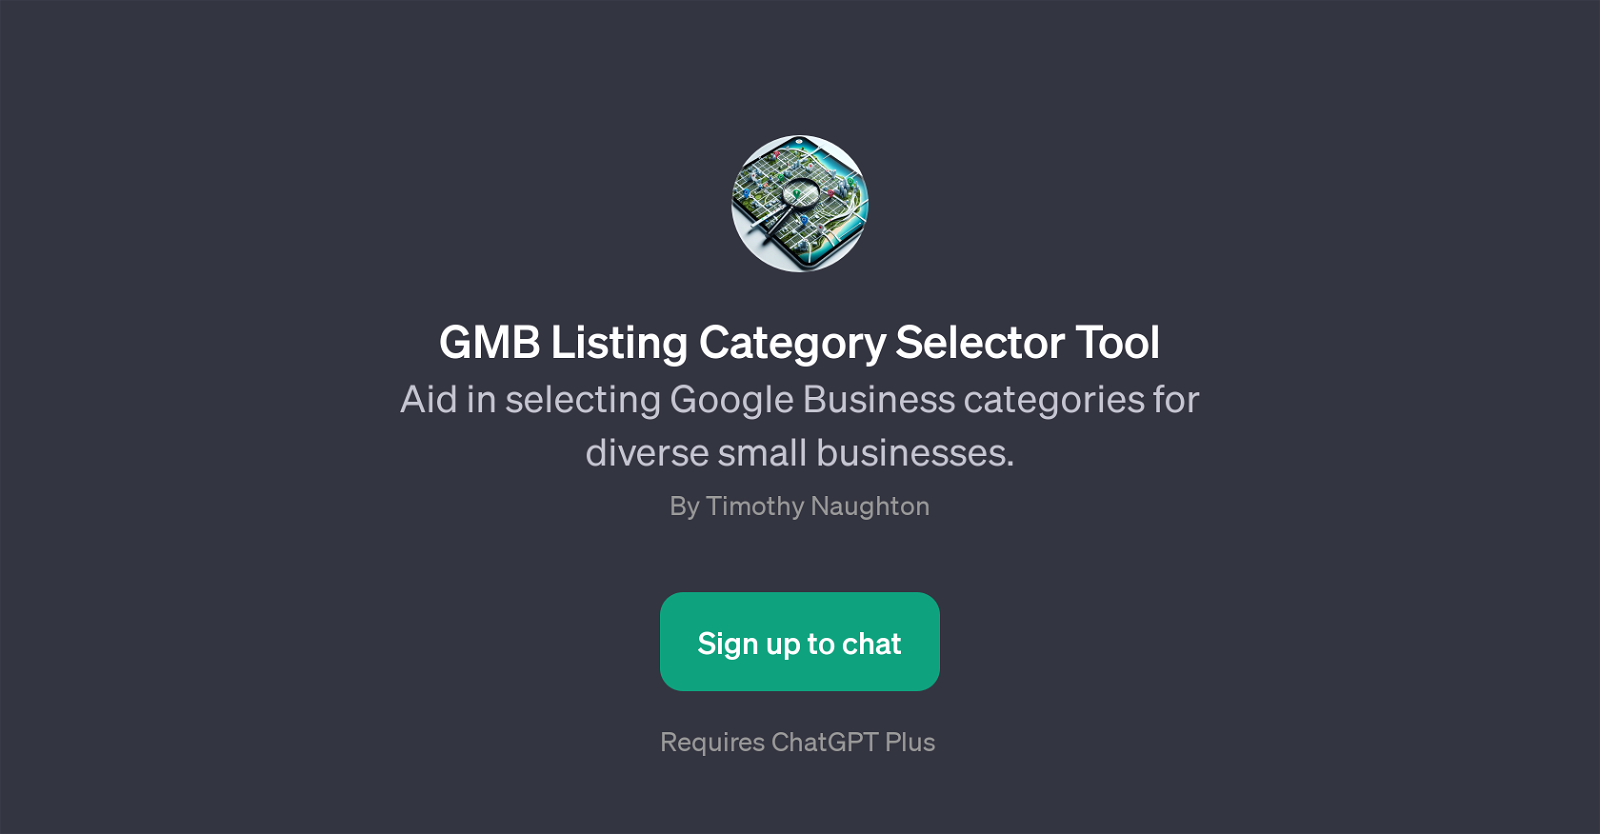 GMB Listing Category Selector Tool website